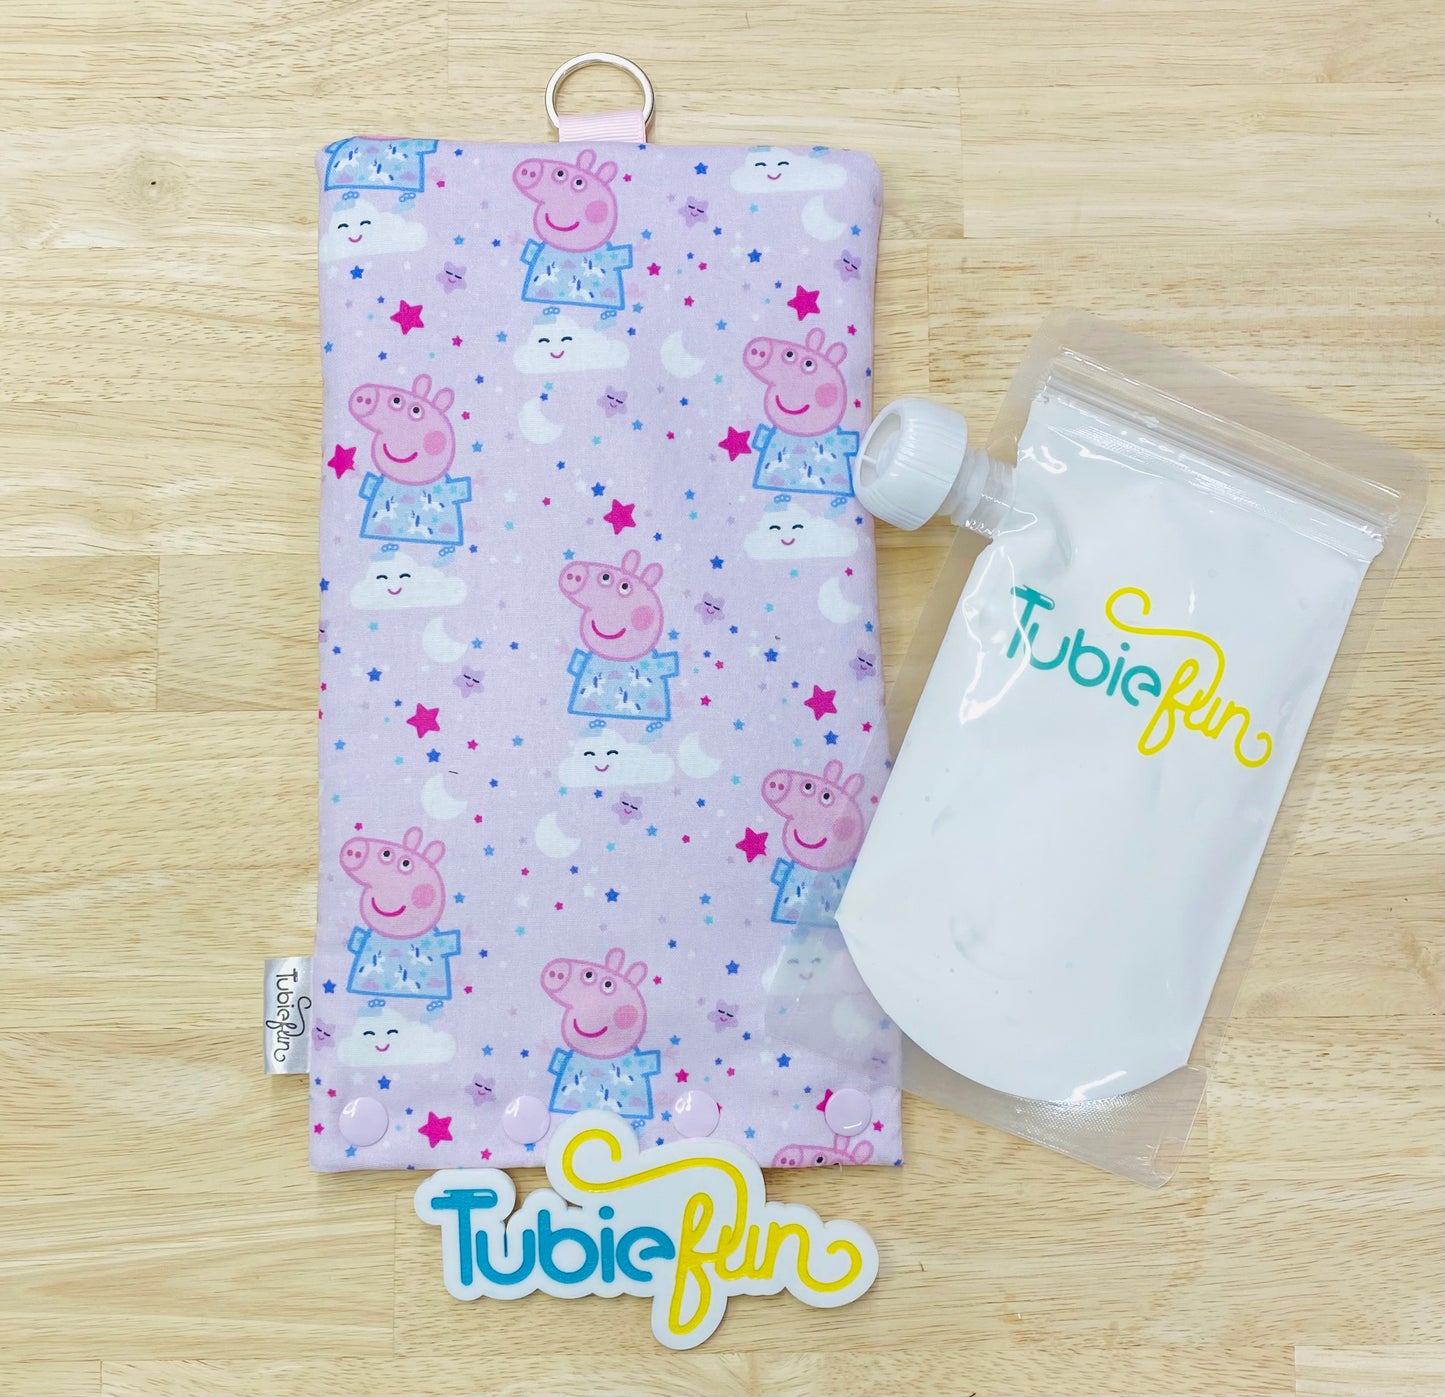 NEW Insulated Milk Bag Suitable for Tubie Fun 500ml Reusable Pouches - Pink Pig